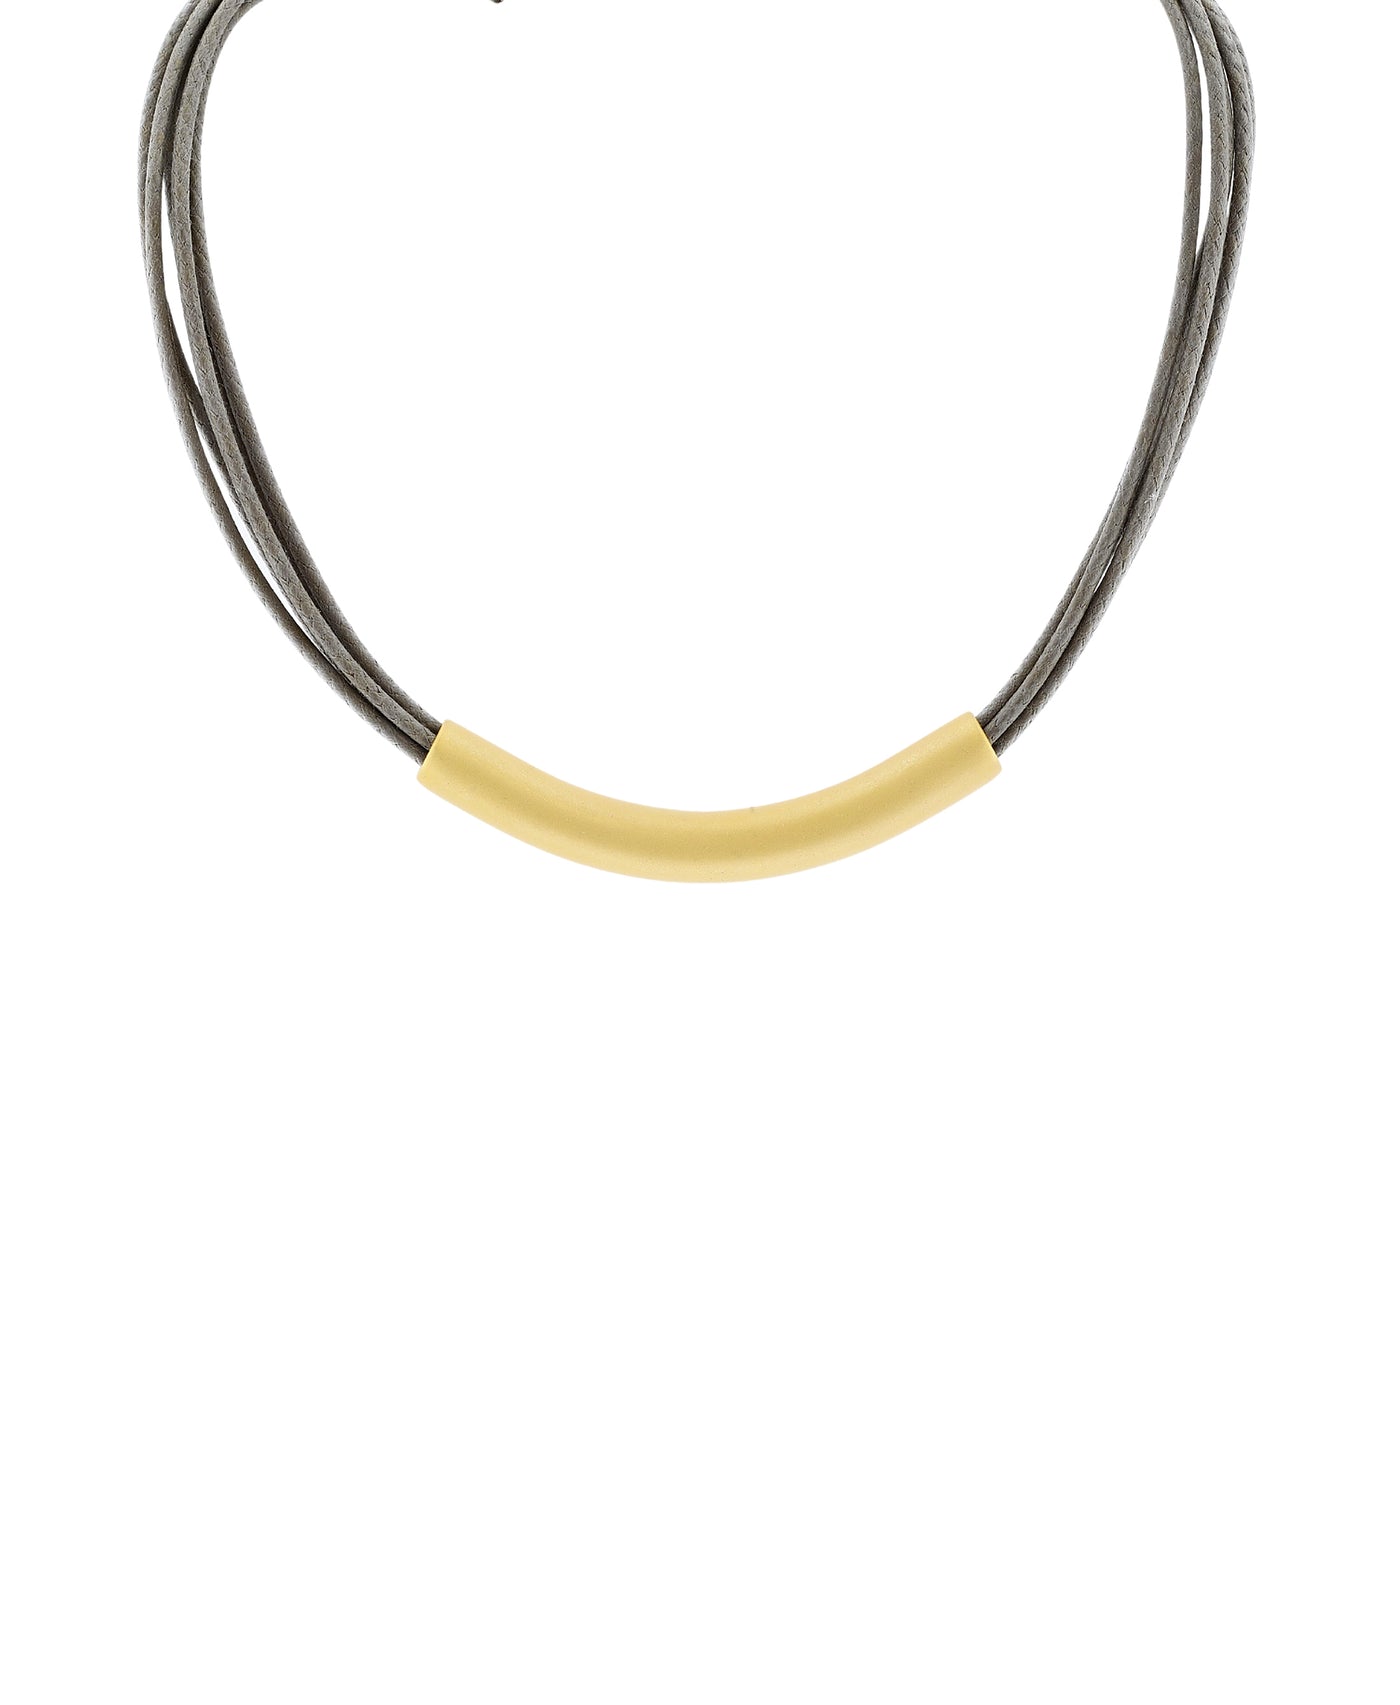 Multi Cord Collar Necklace w/ Metal Accent image 1